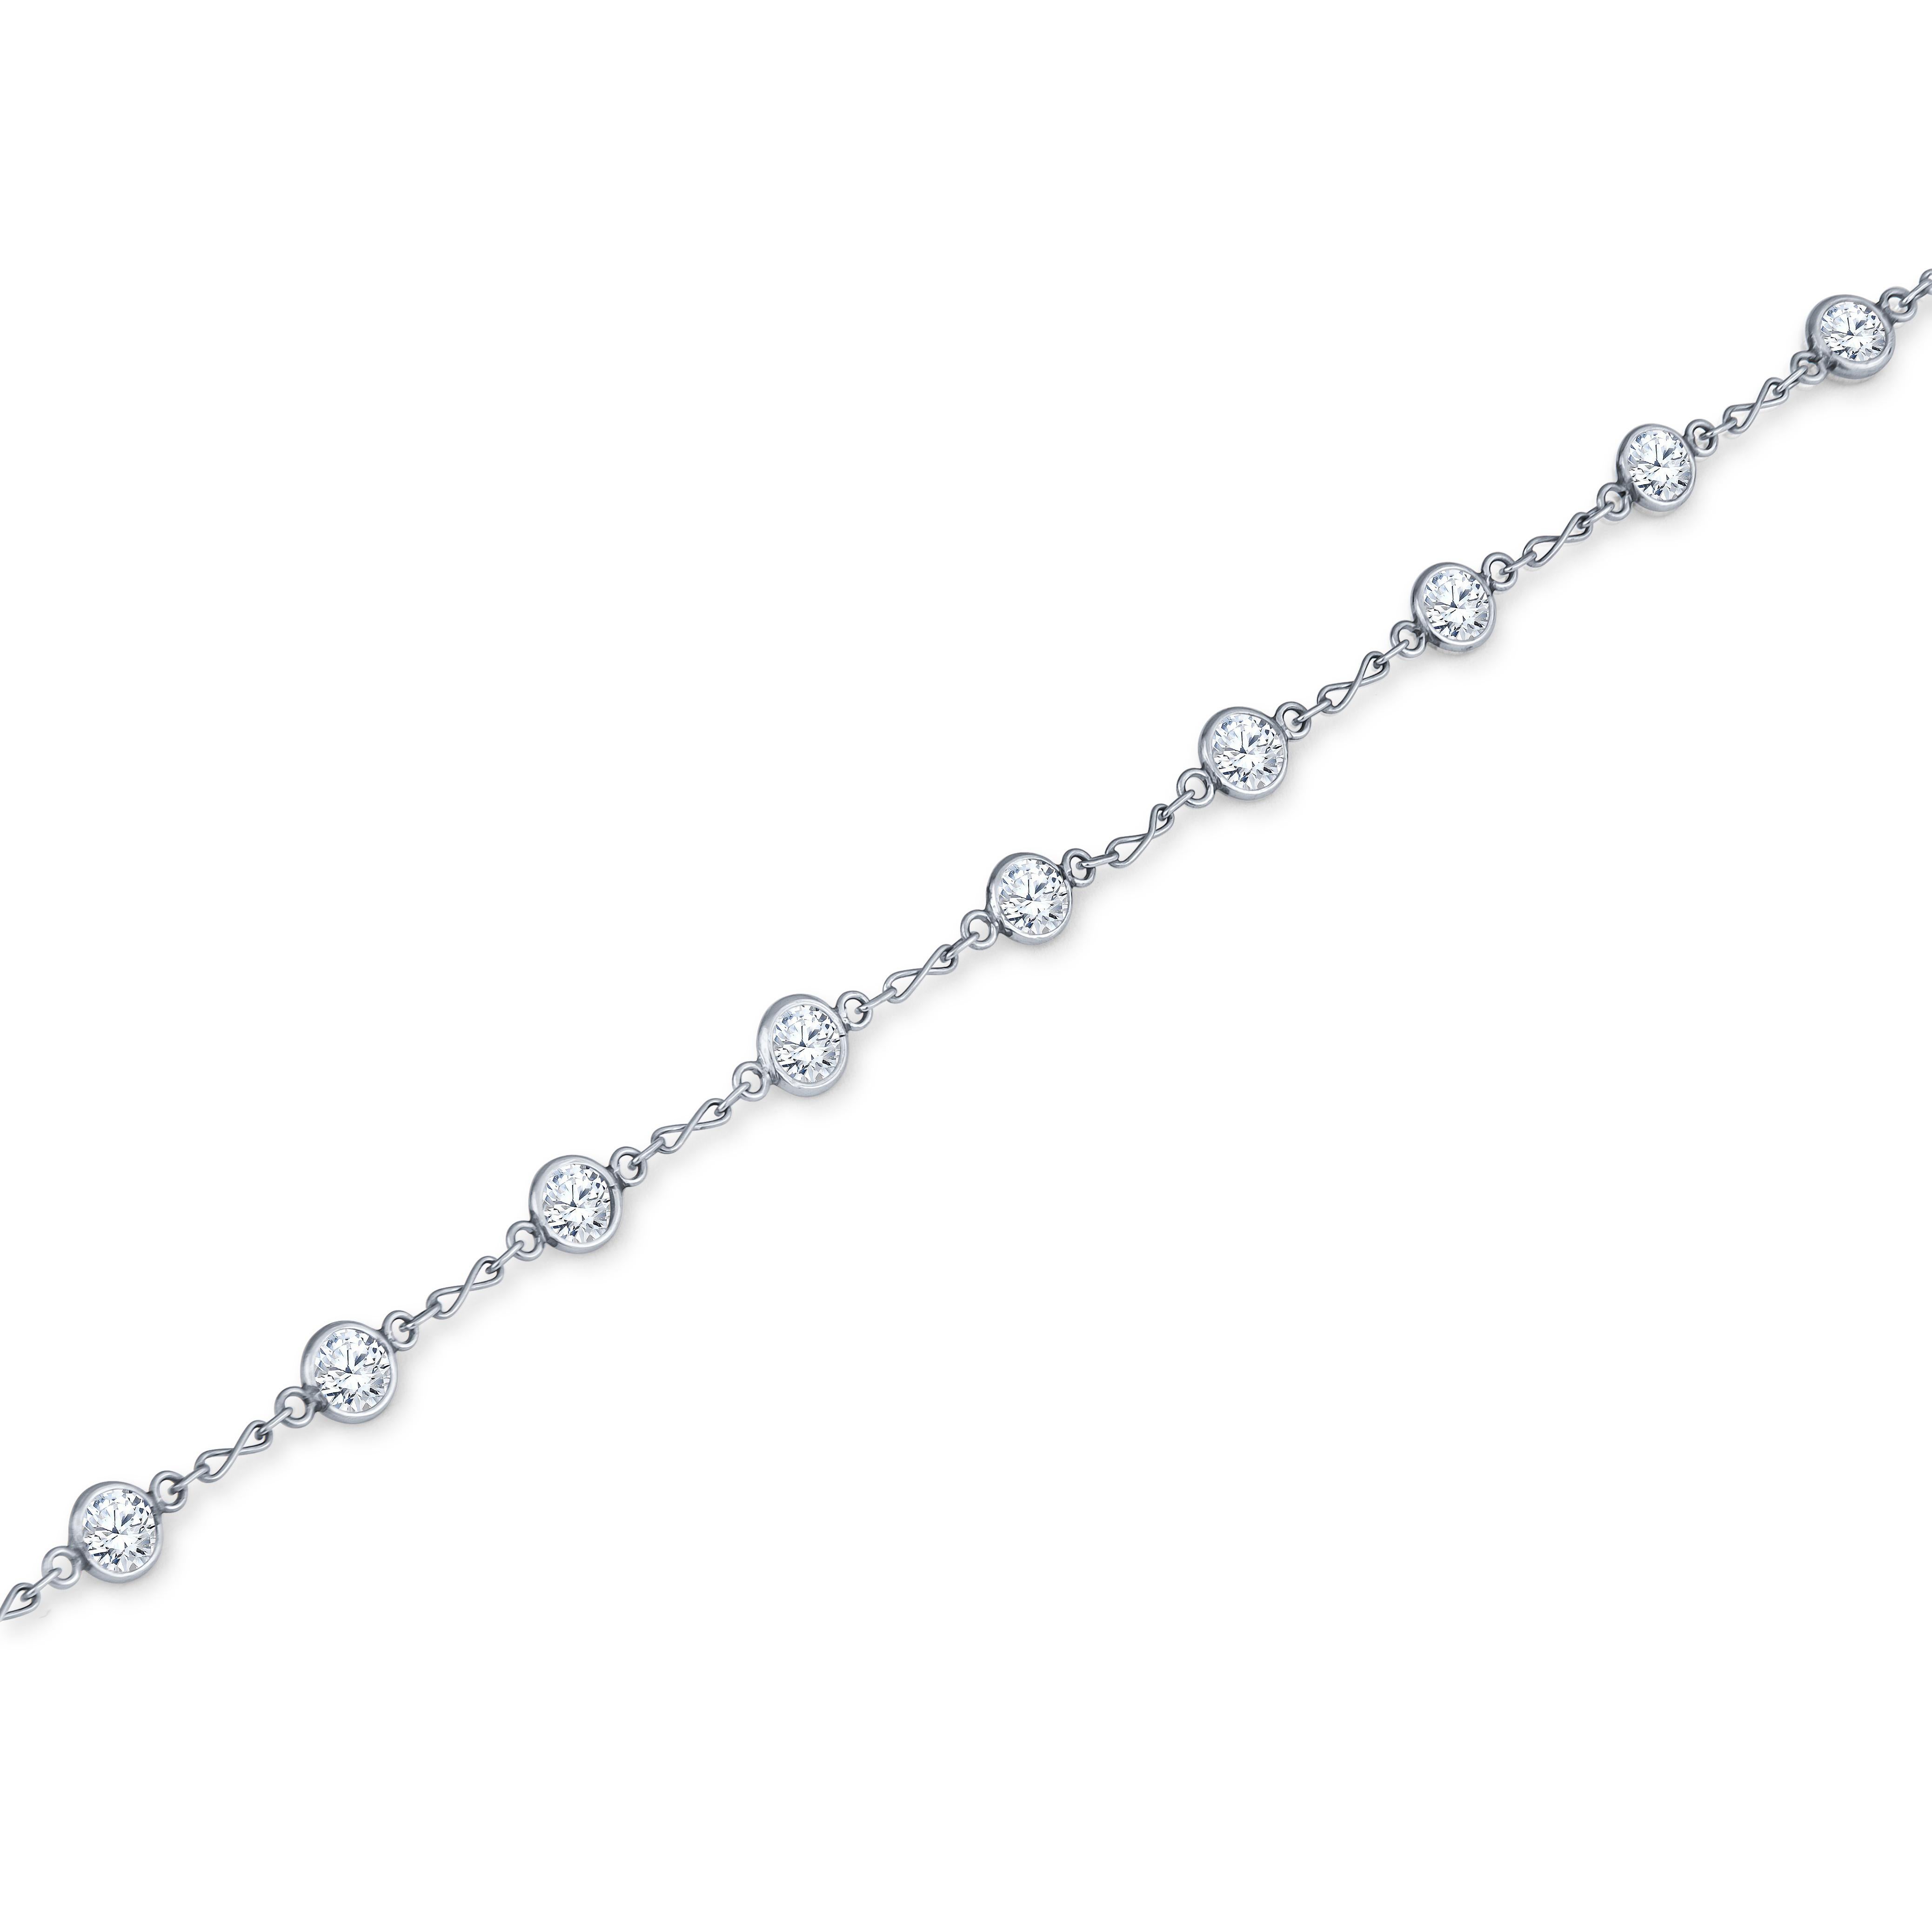 This station necklace is part of our Soft Glamour collection. It features 34 old European cut diamonds that have a 4.76ct total weight, set in a 14kt white gold 19 inch chain. The quality of the diamonds range from G to J in color and VS2 to I1 in